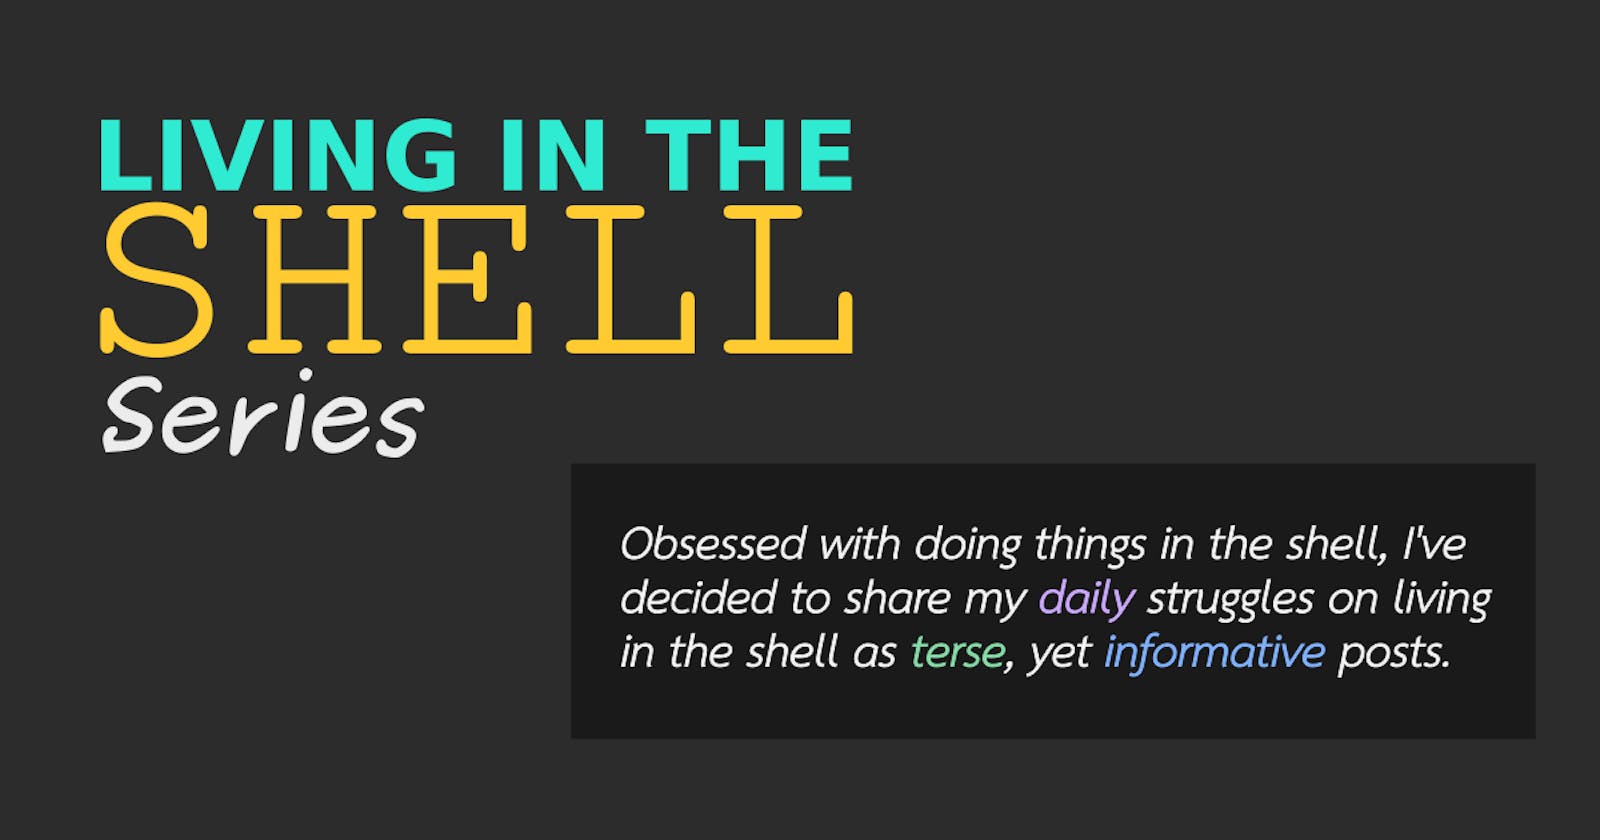 Living in the Shell #16; curl (HTTP/S Client) (Part 1)